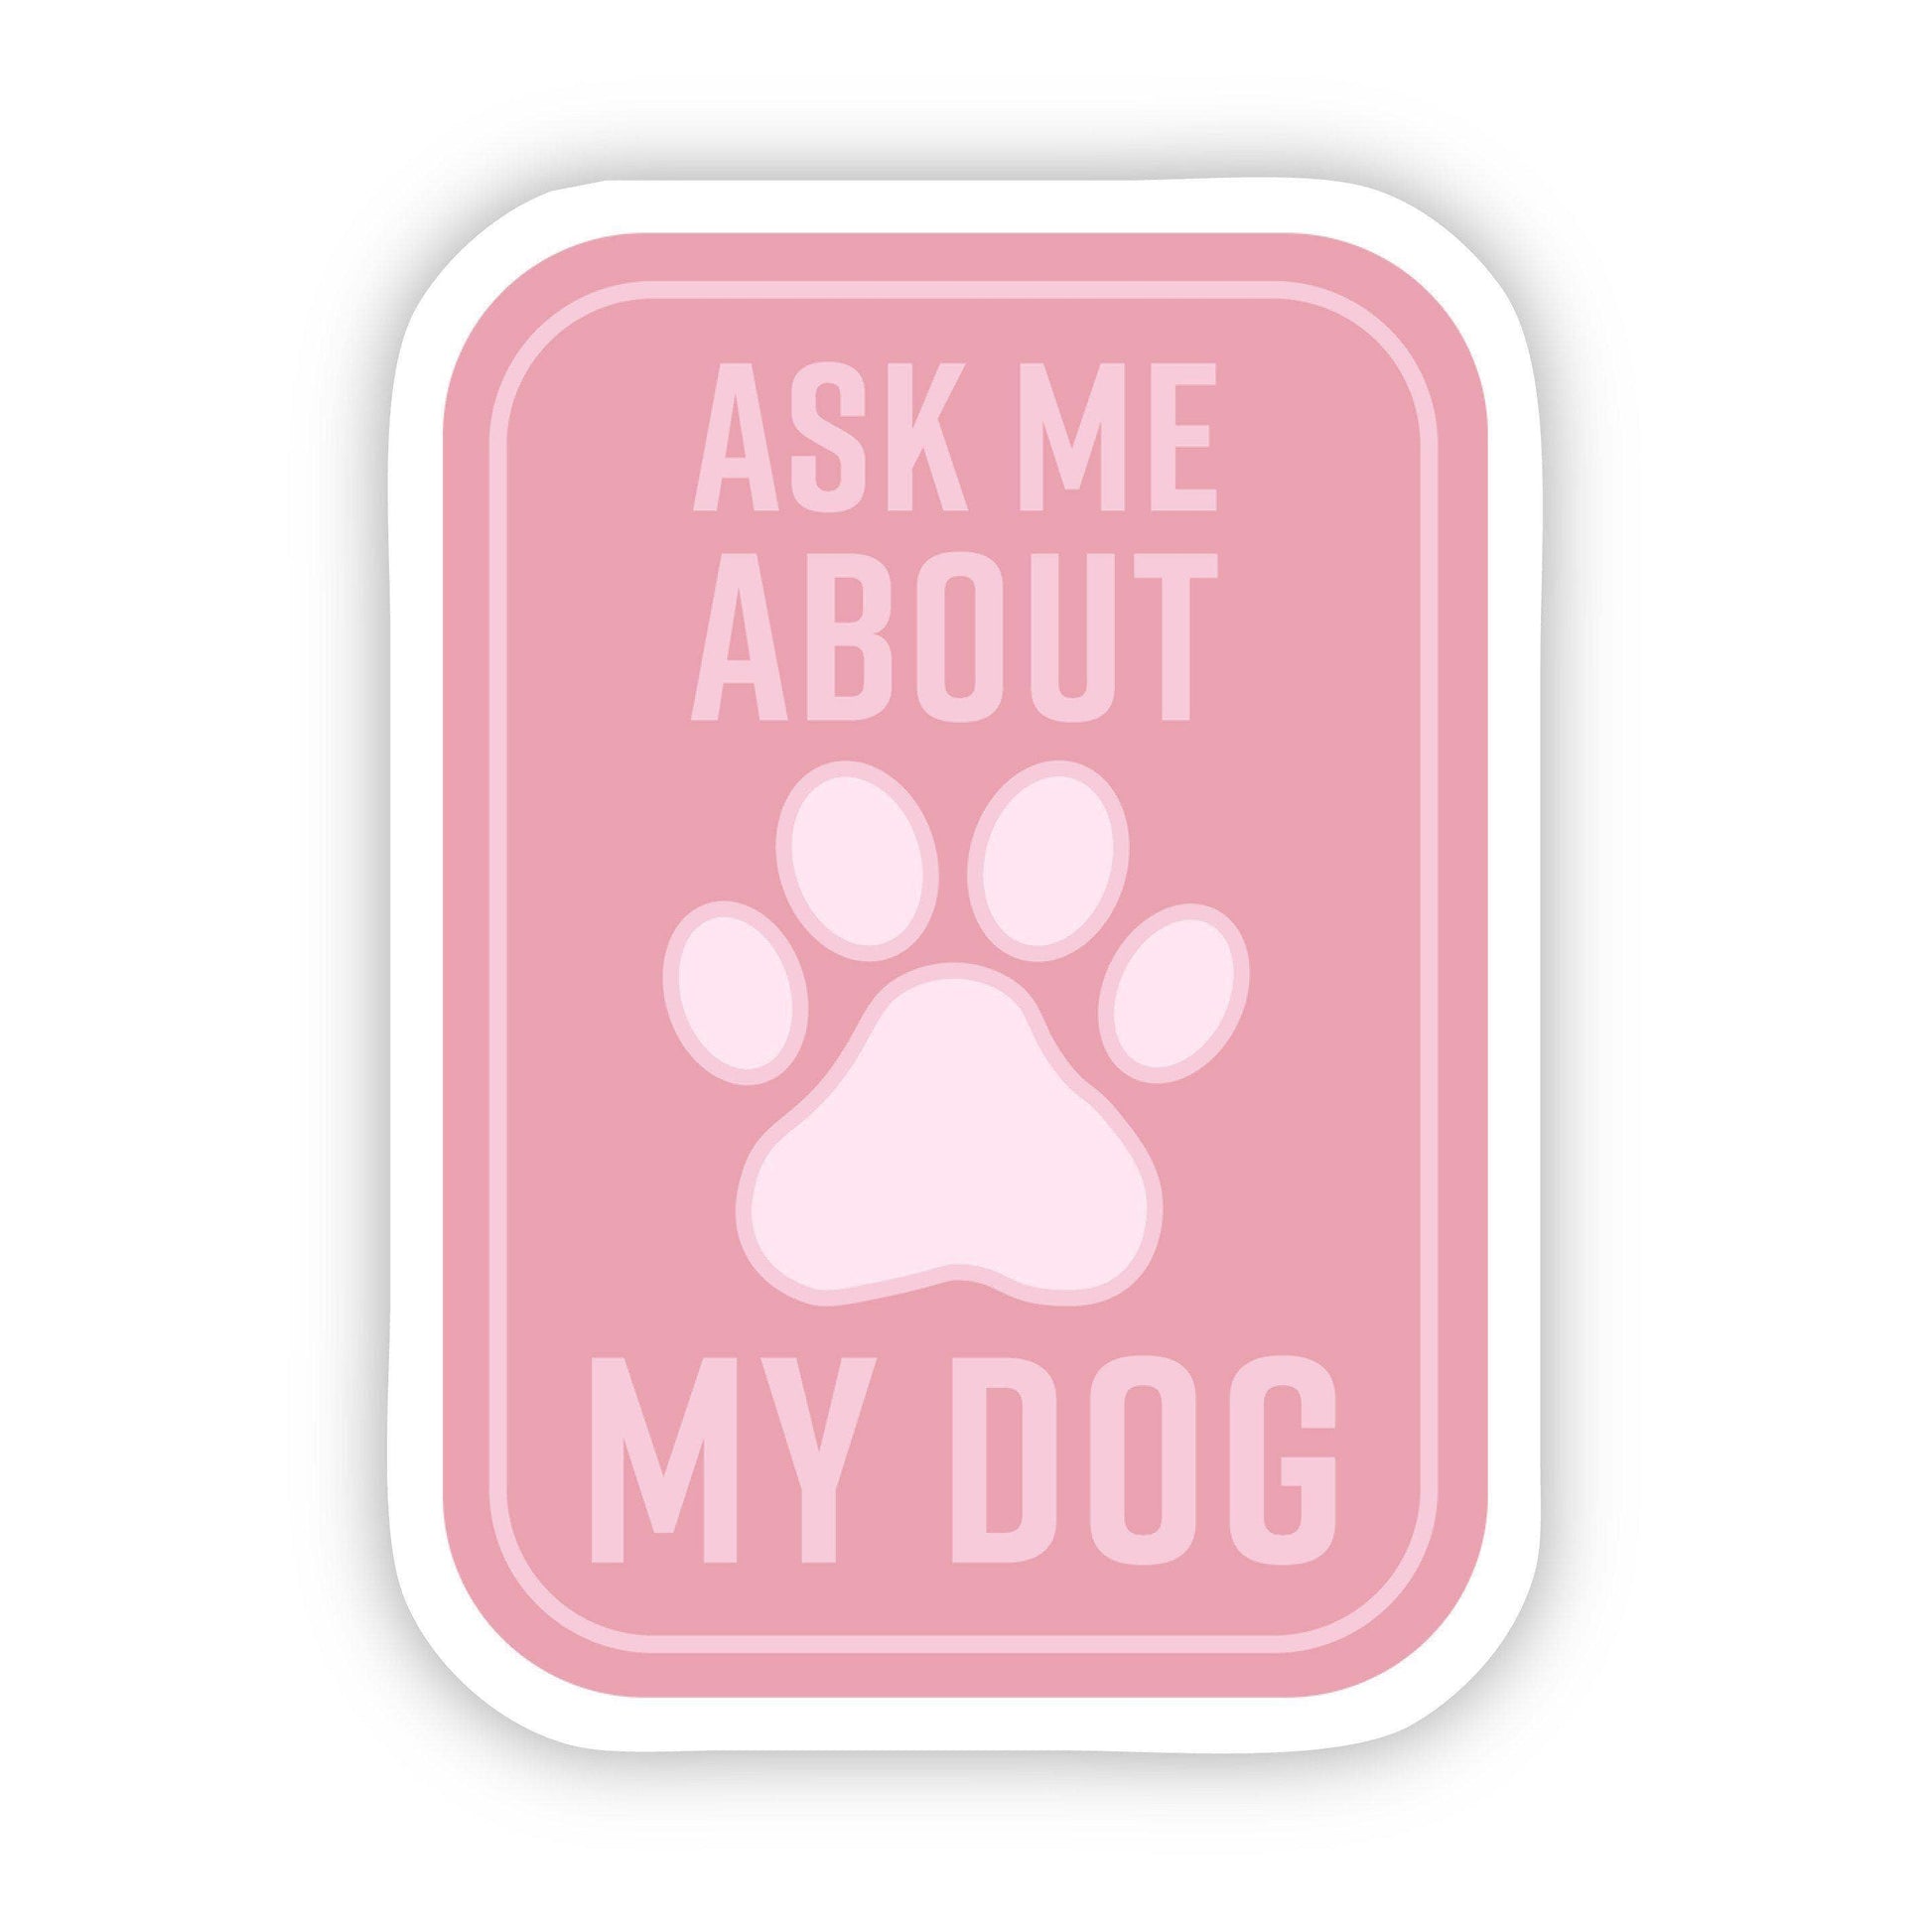 Ask me about my dog sticker pink, by Big Moods